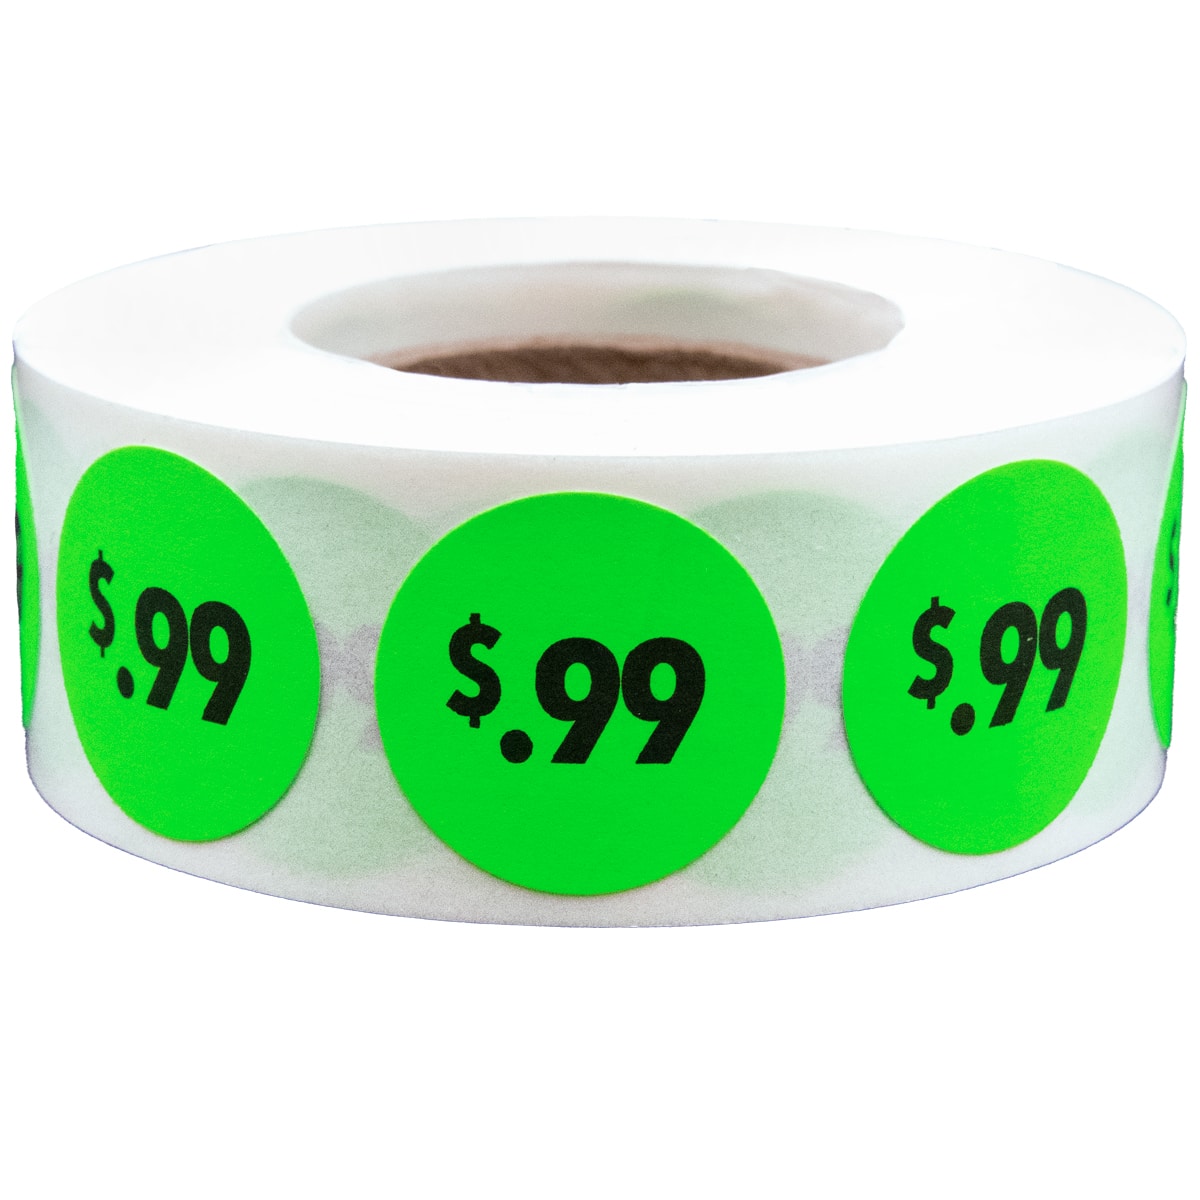 Fluorescent Red $6.99 Pricing Stickers 3/4 Round